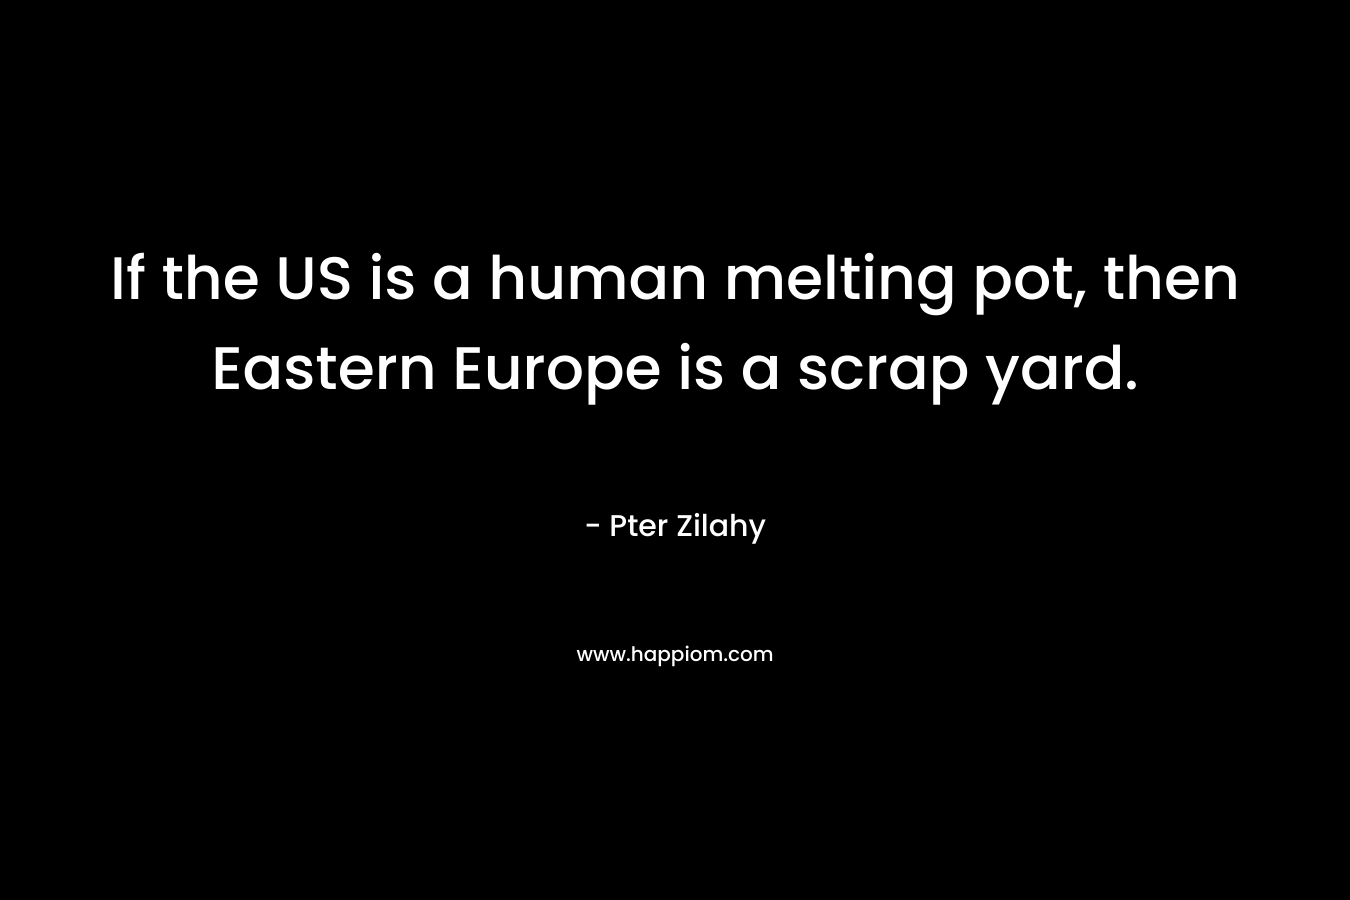 If the US is a human melting pot, then Eastern Europe is a scrap yard. – Pter Zilahy